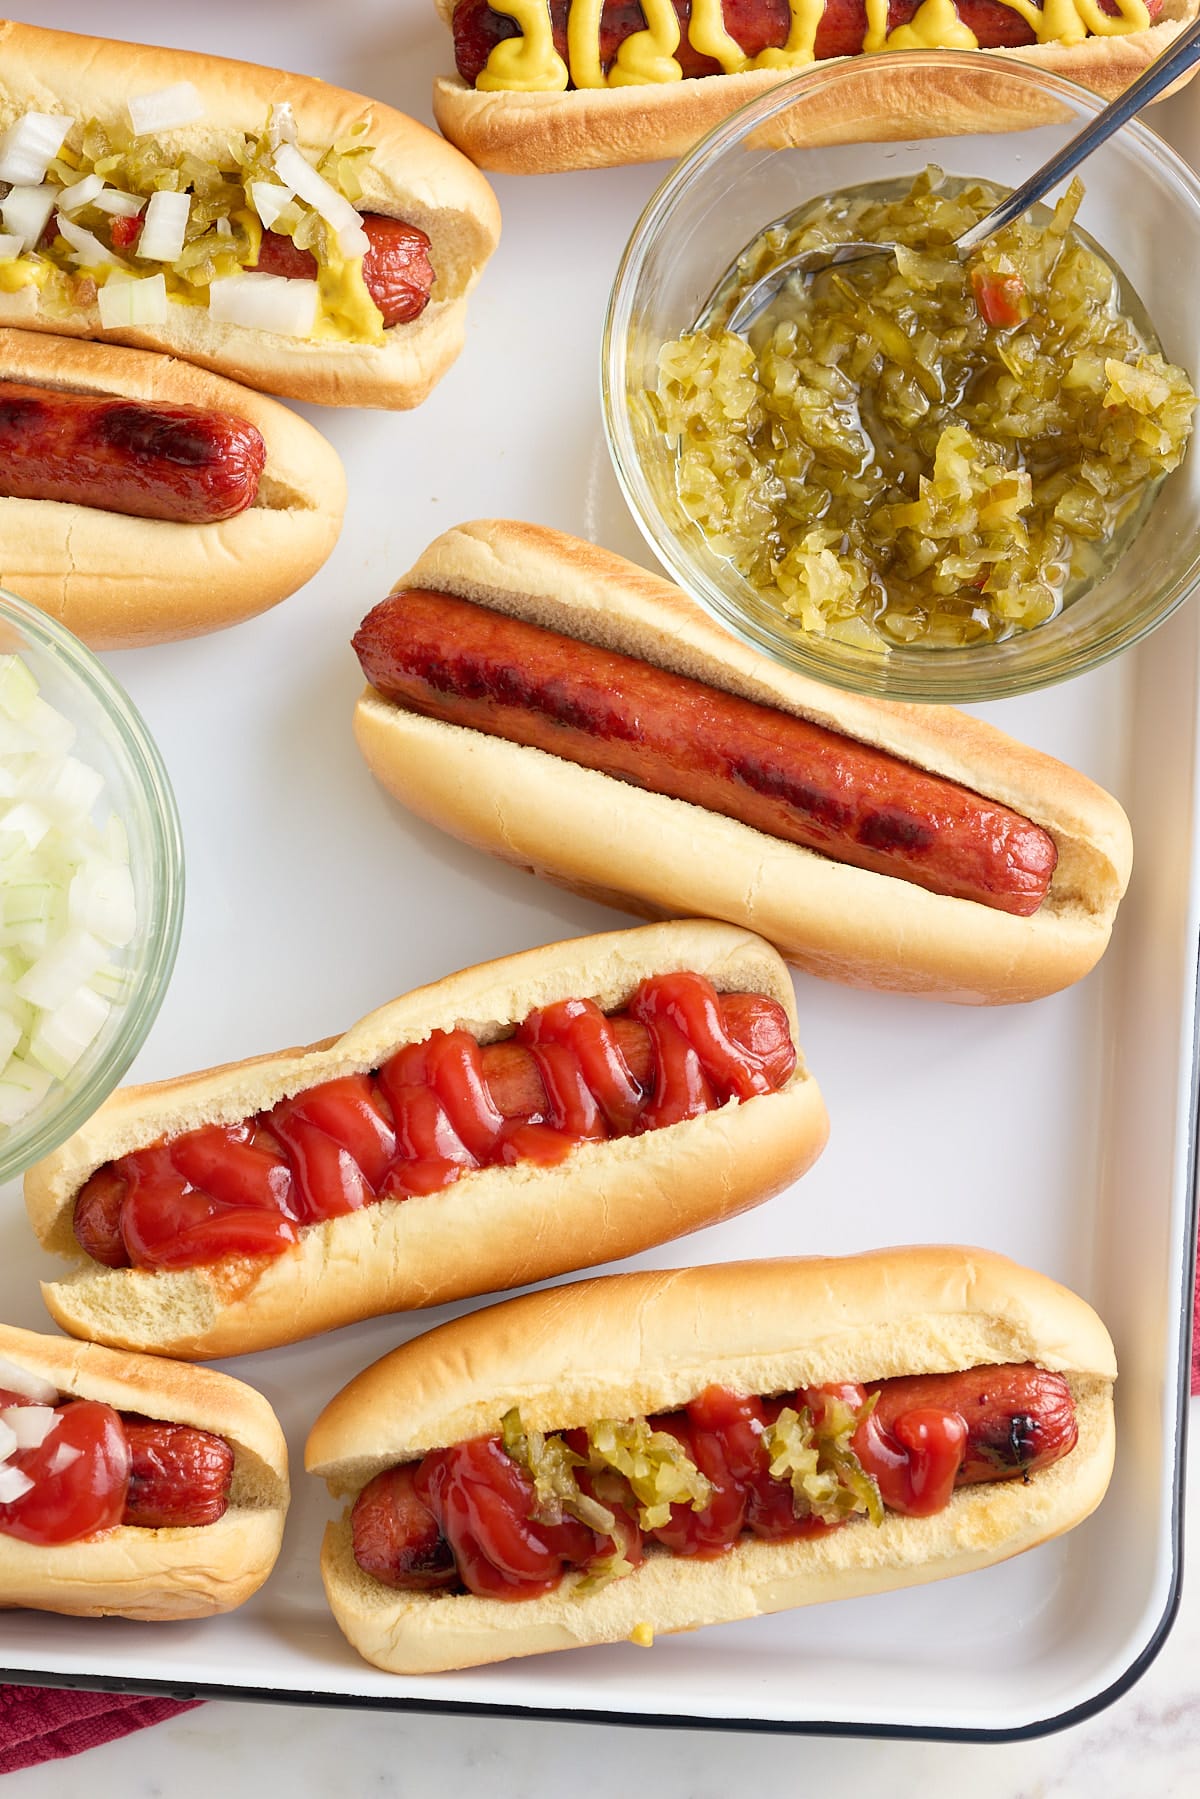 white tray with oven baked hot dogs in hot dog buns with a variety of toppings and sauces